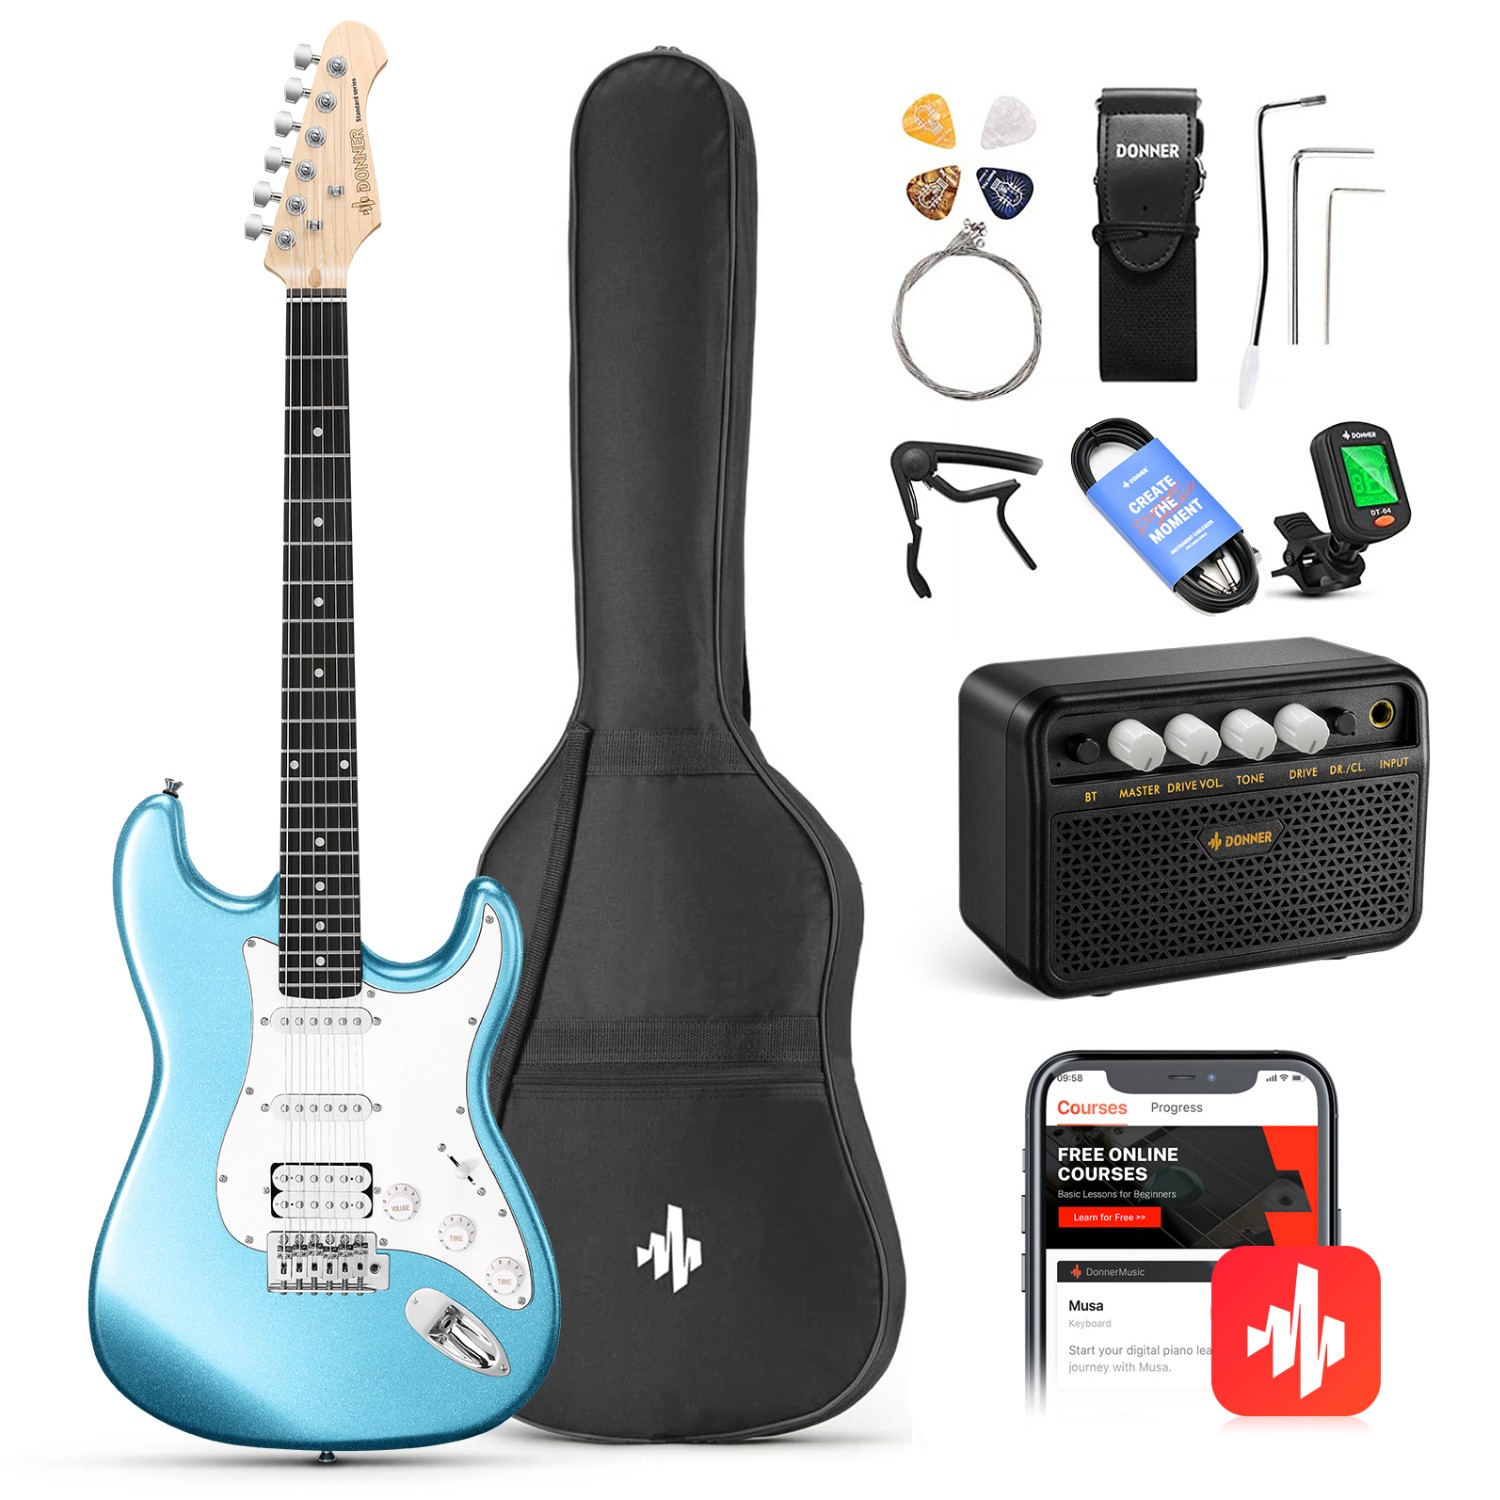 Donner DST-100R Solid Body 39 Inch Full Size Electric Guitar Kit , Beginner Starter, with Amplifier, Bag, Capo, Strap, String, Tuner, Cable, Picks - image 1 of 6